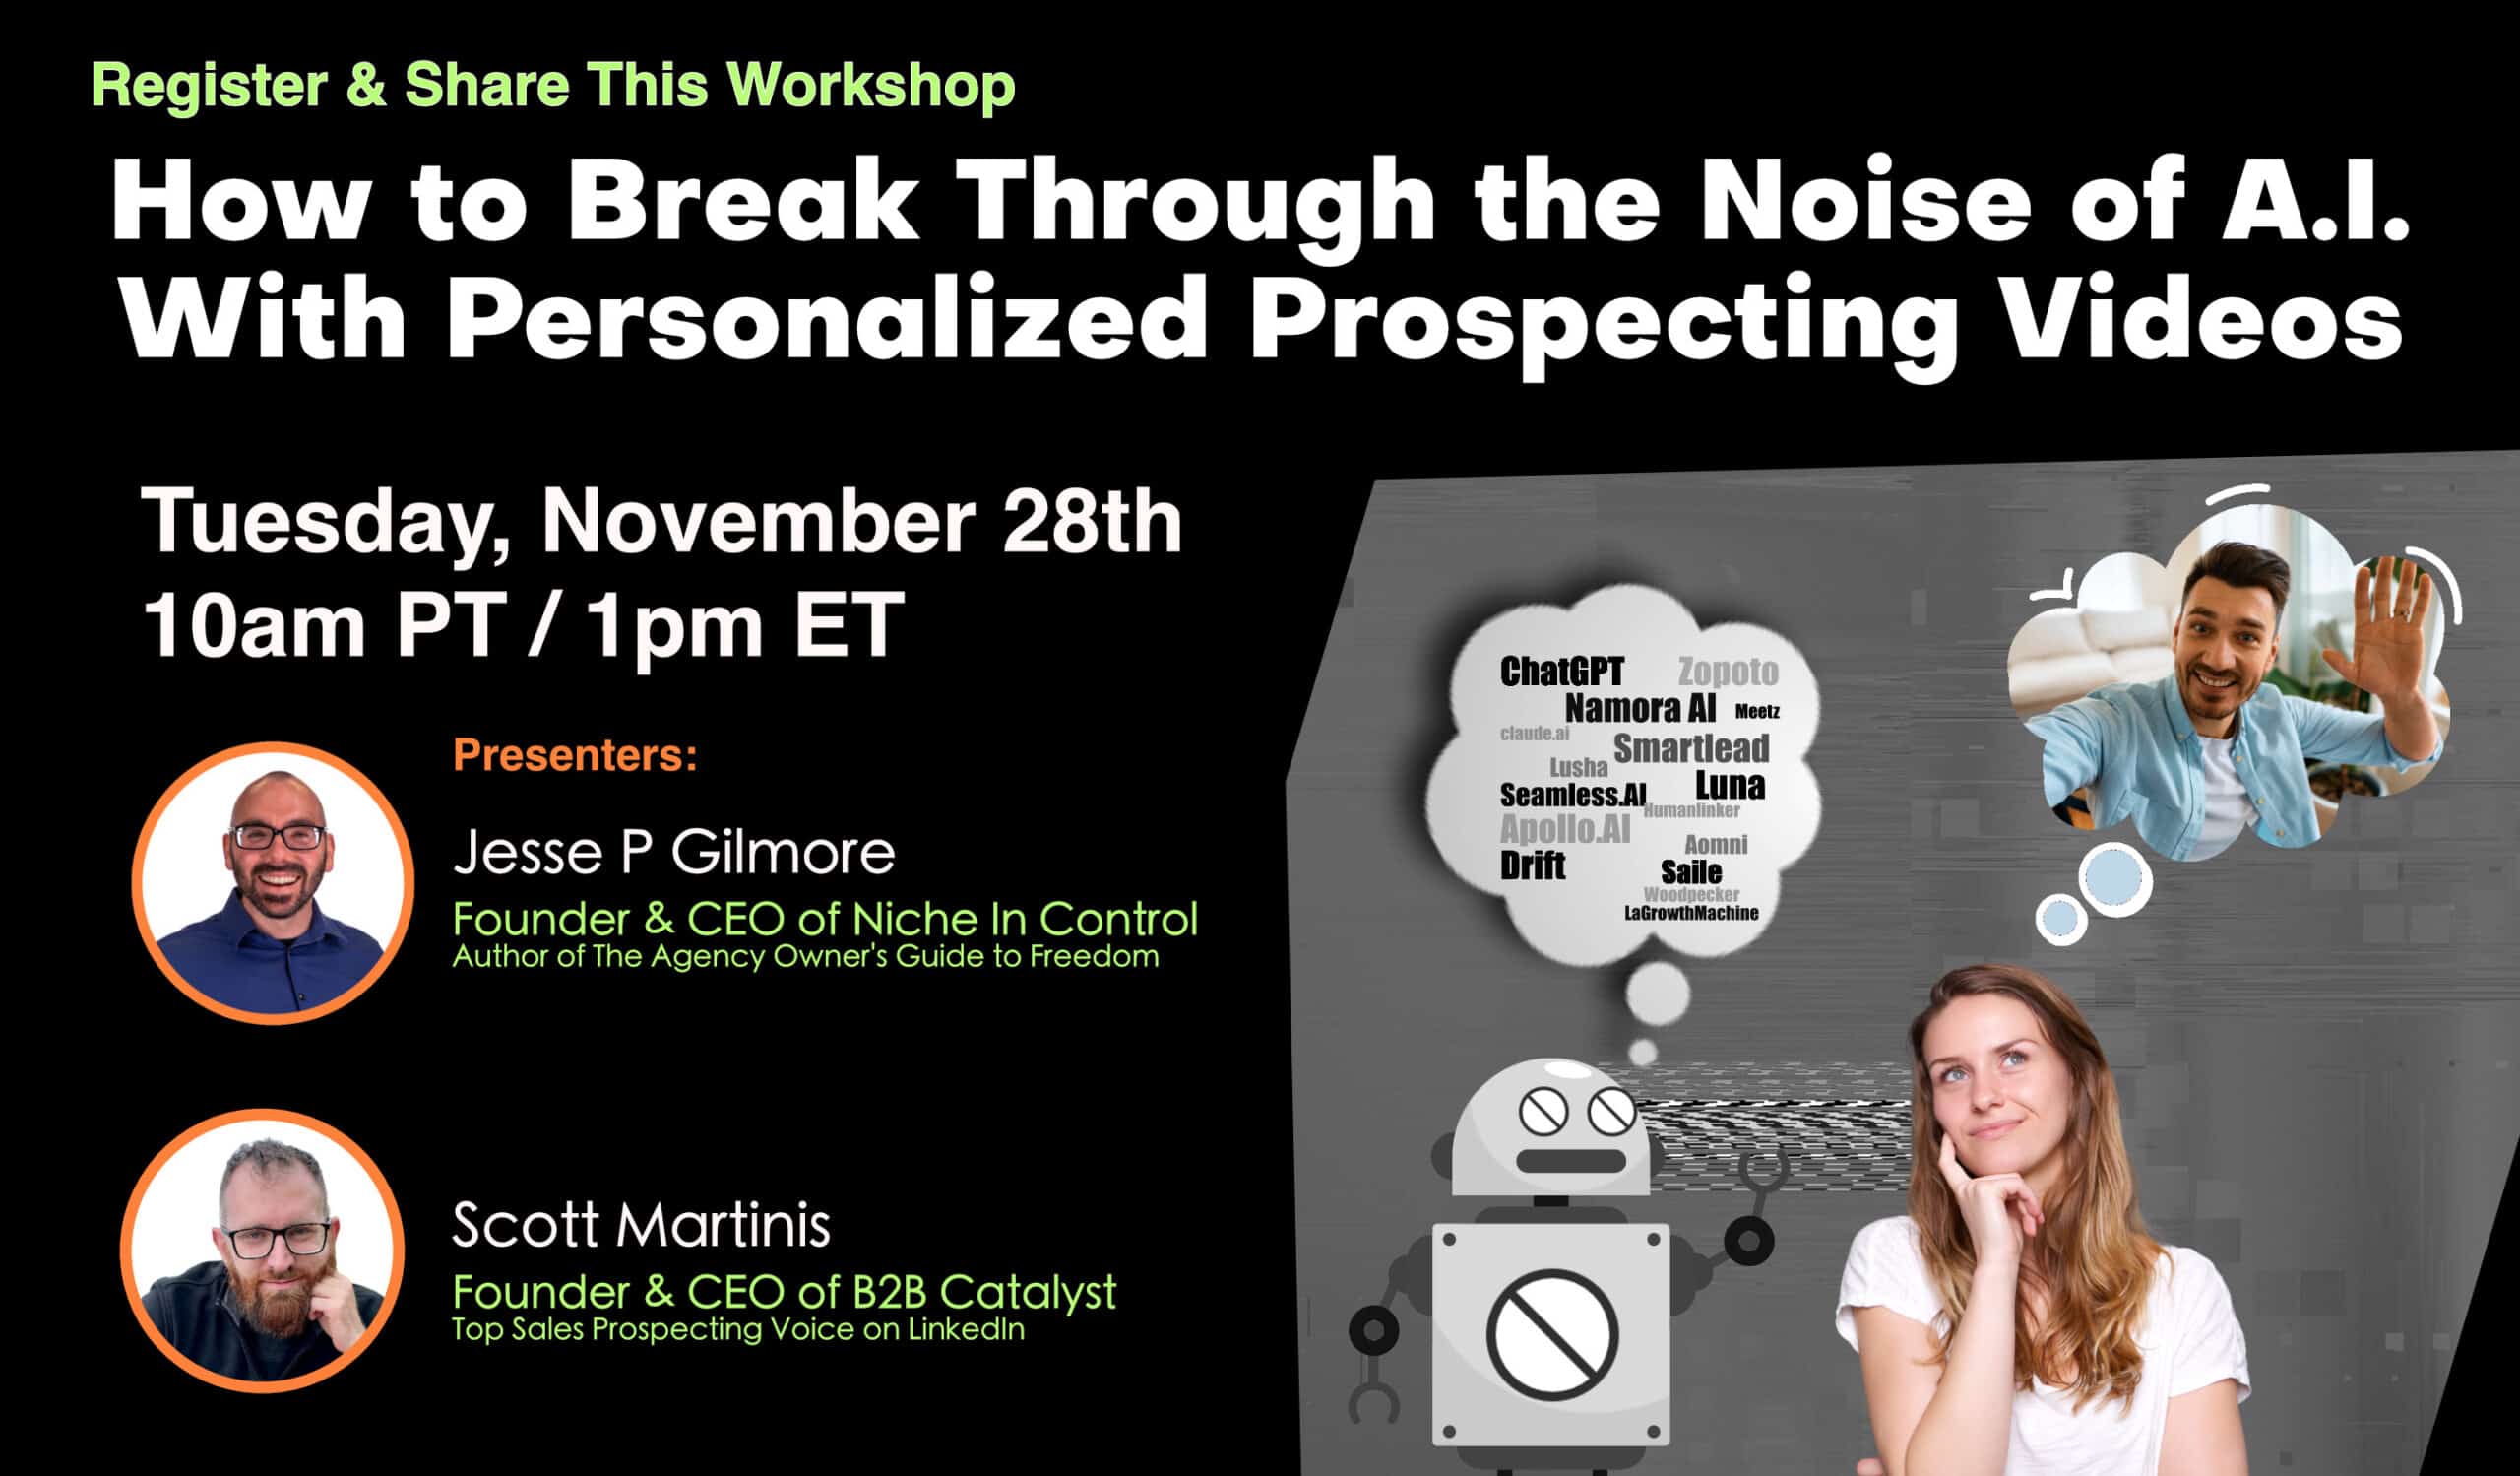 How to Break Through the Noise of AI with Personalized Prospecting Videos. Presented by Jesse P. Gilmore and Scott Martinis. 